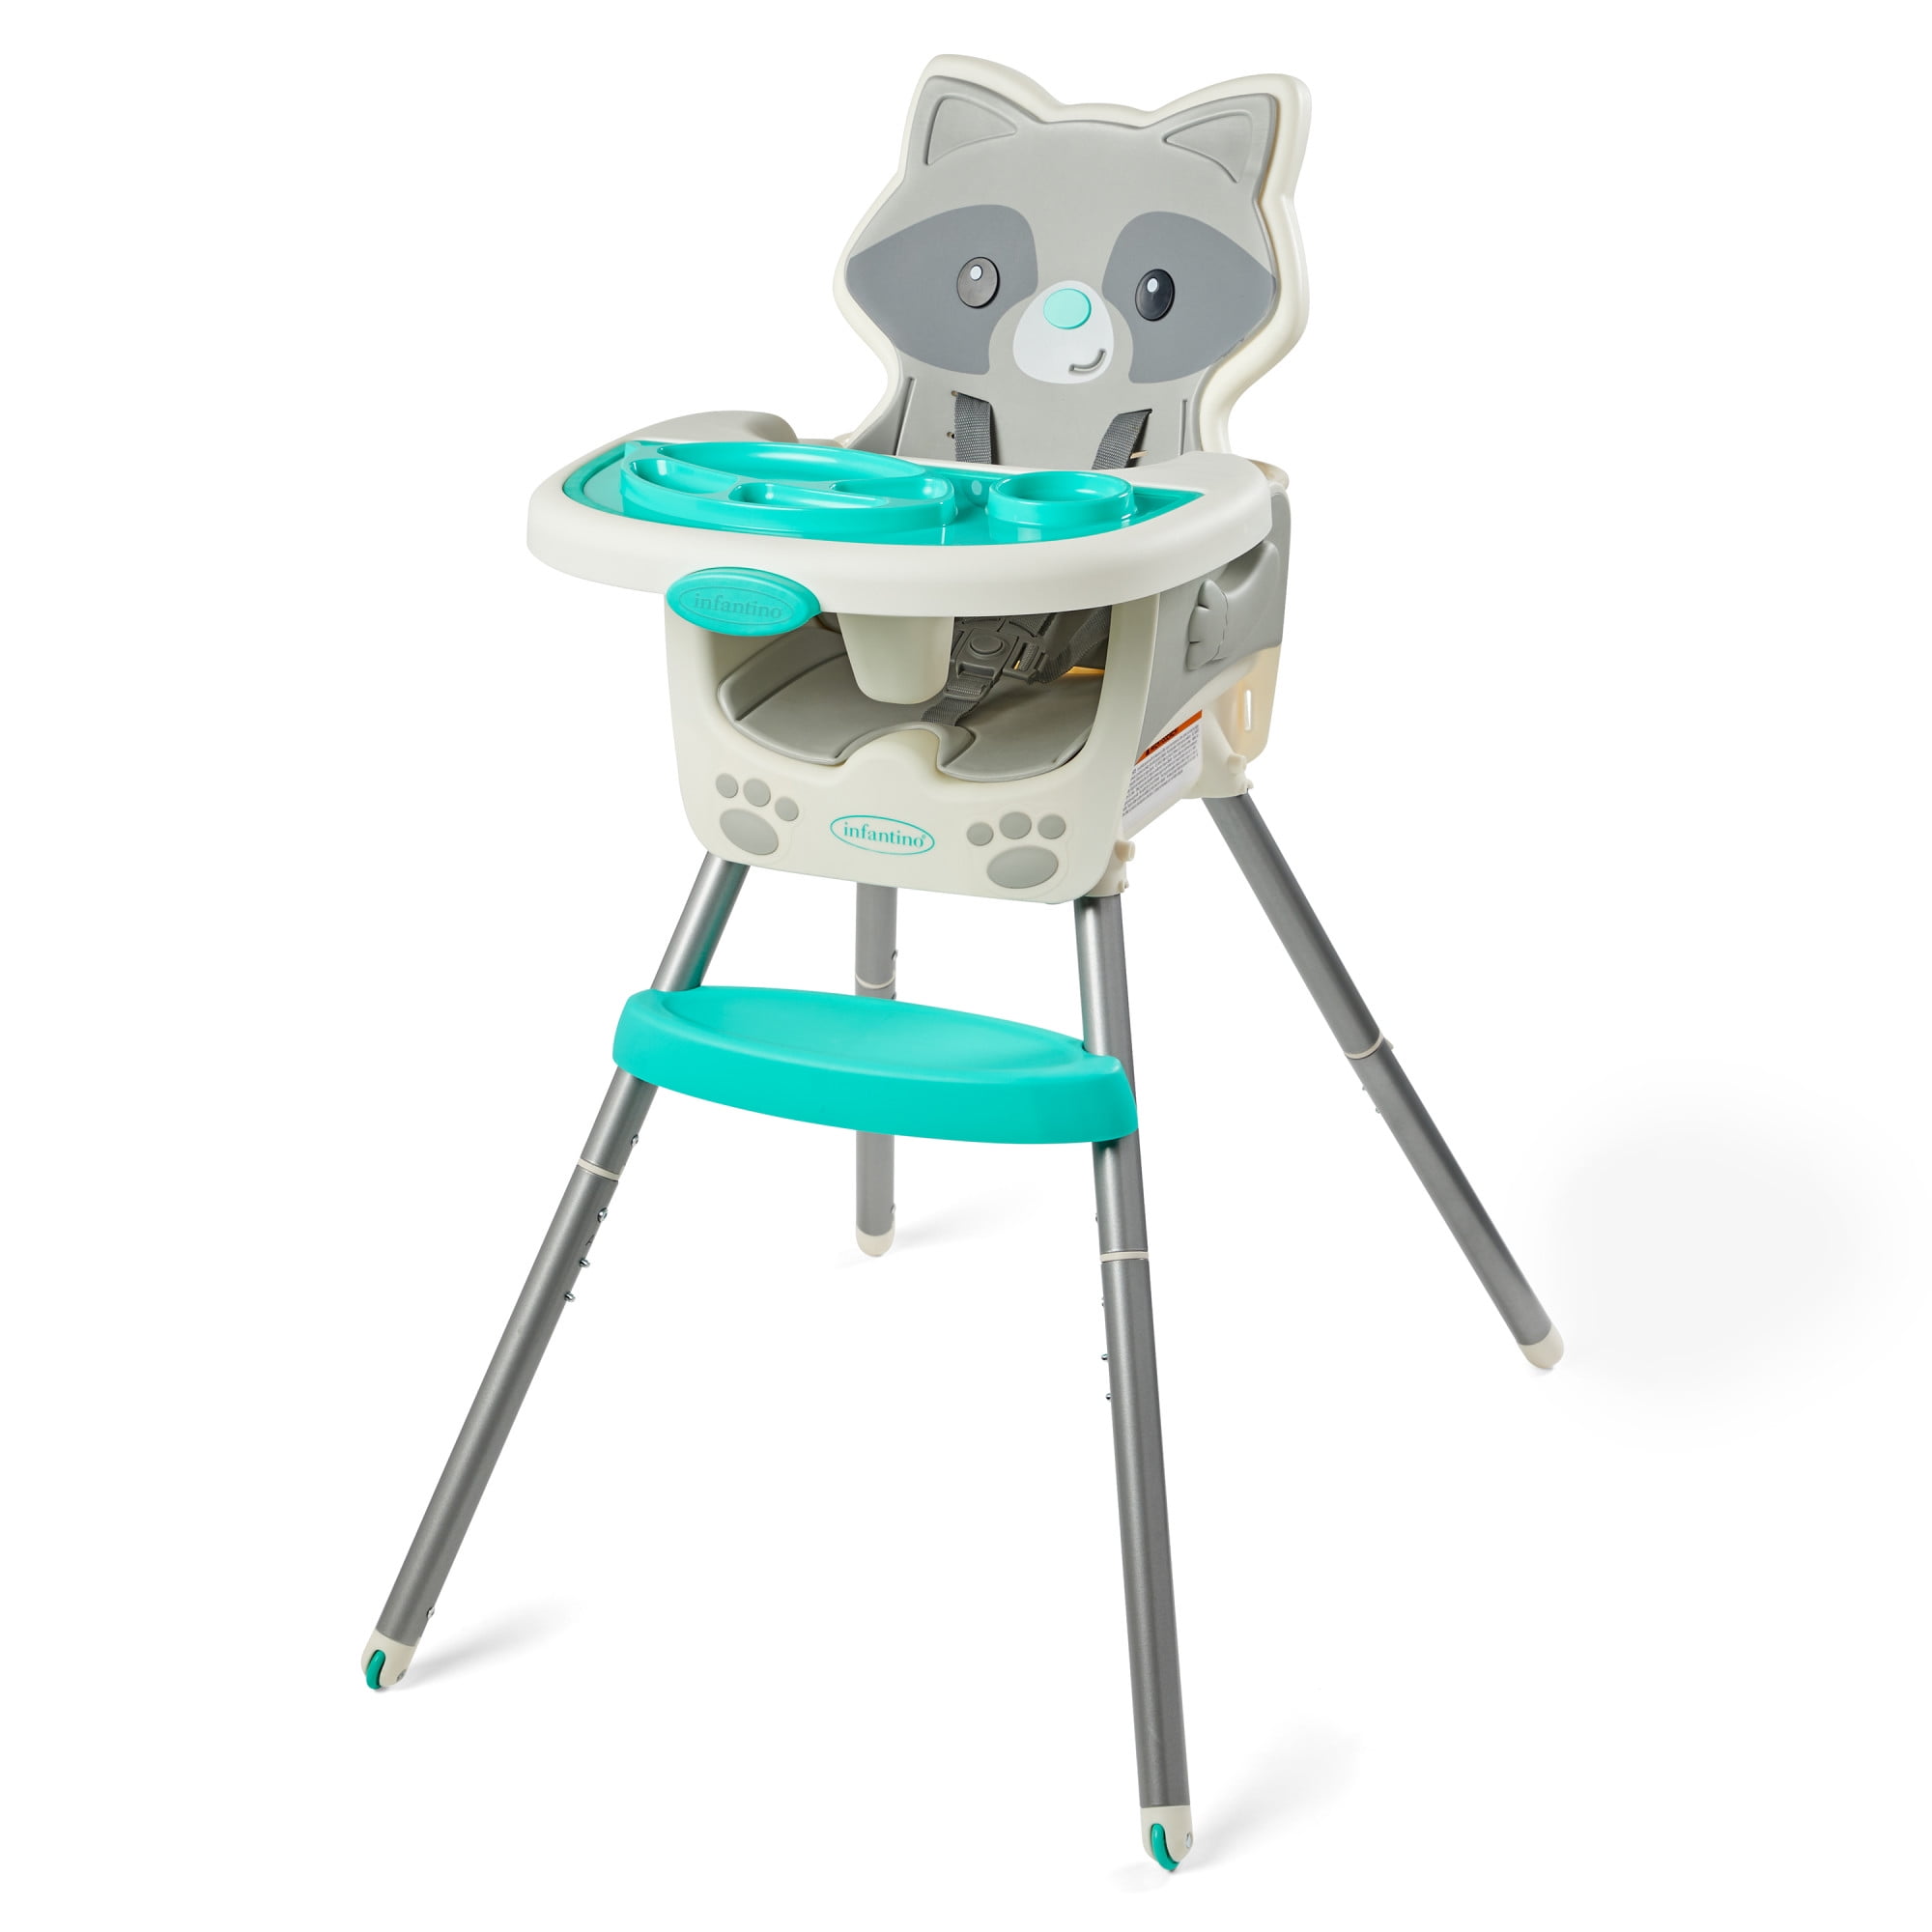 Infantino Grow-With-Me 4-in-1 Convertible High Chair, Unisex, 4-Ways to Use, Infant to Toddler, Racoon